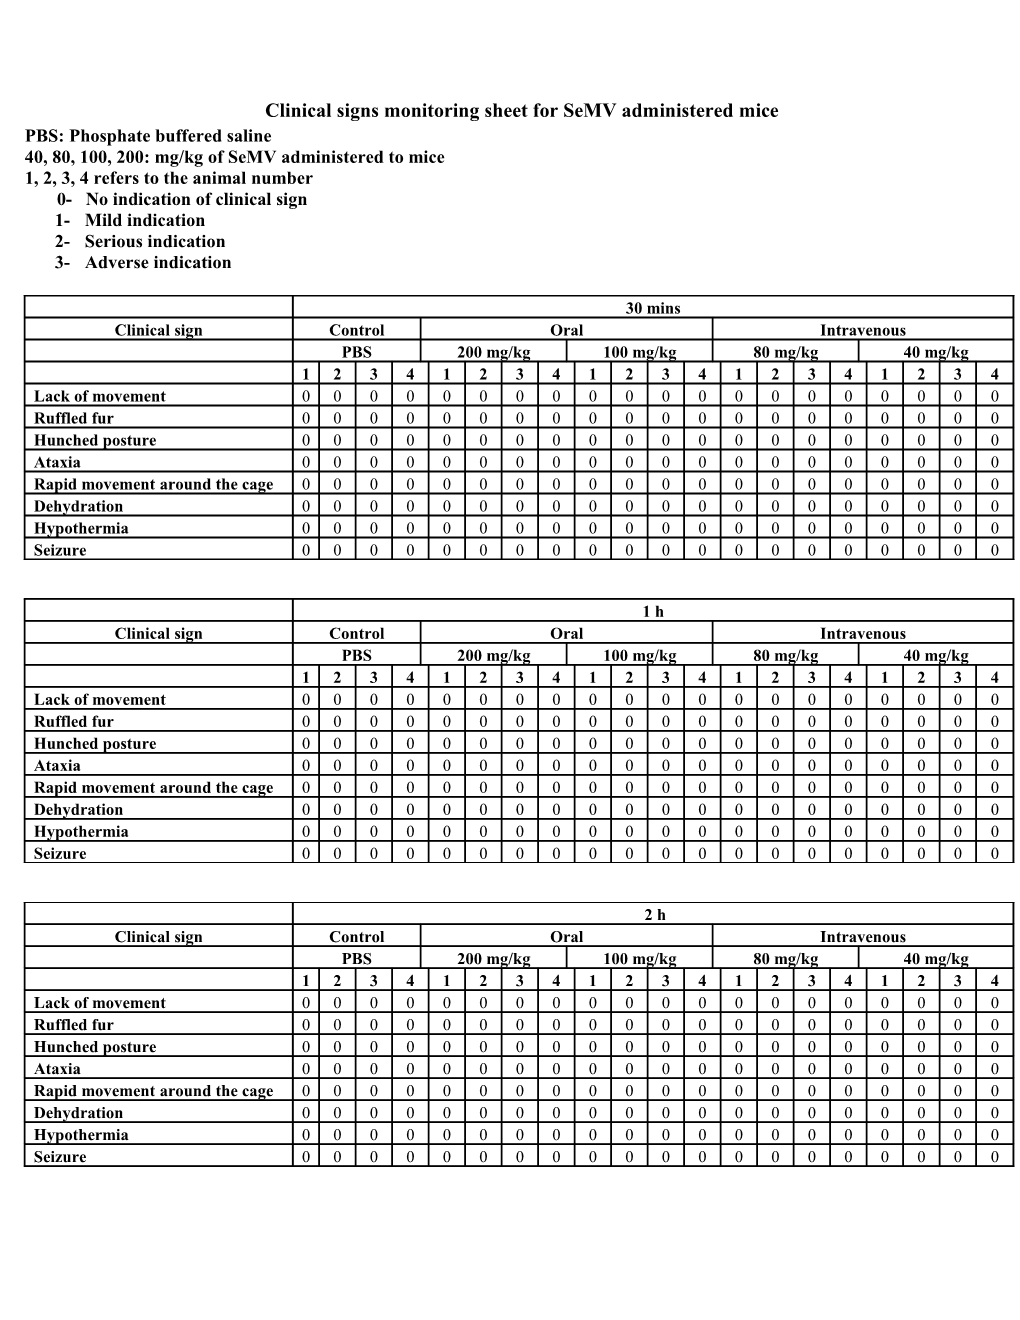 Clinical Signs Monitoring Sheet for Semv Administered Mice